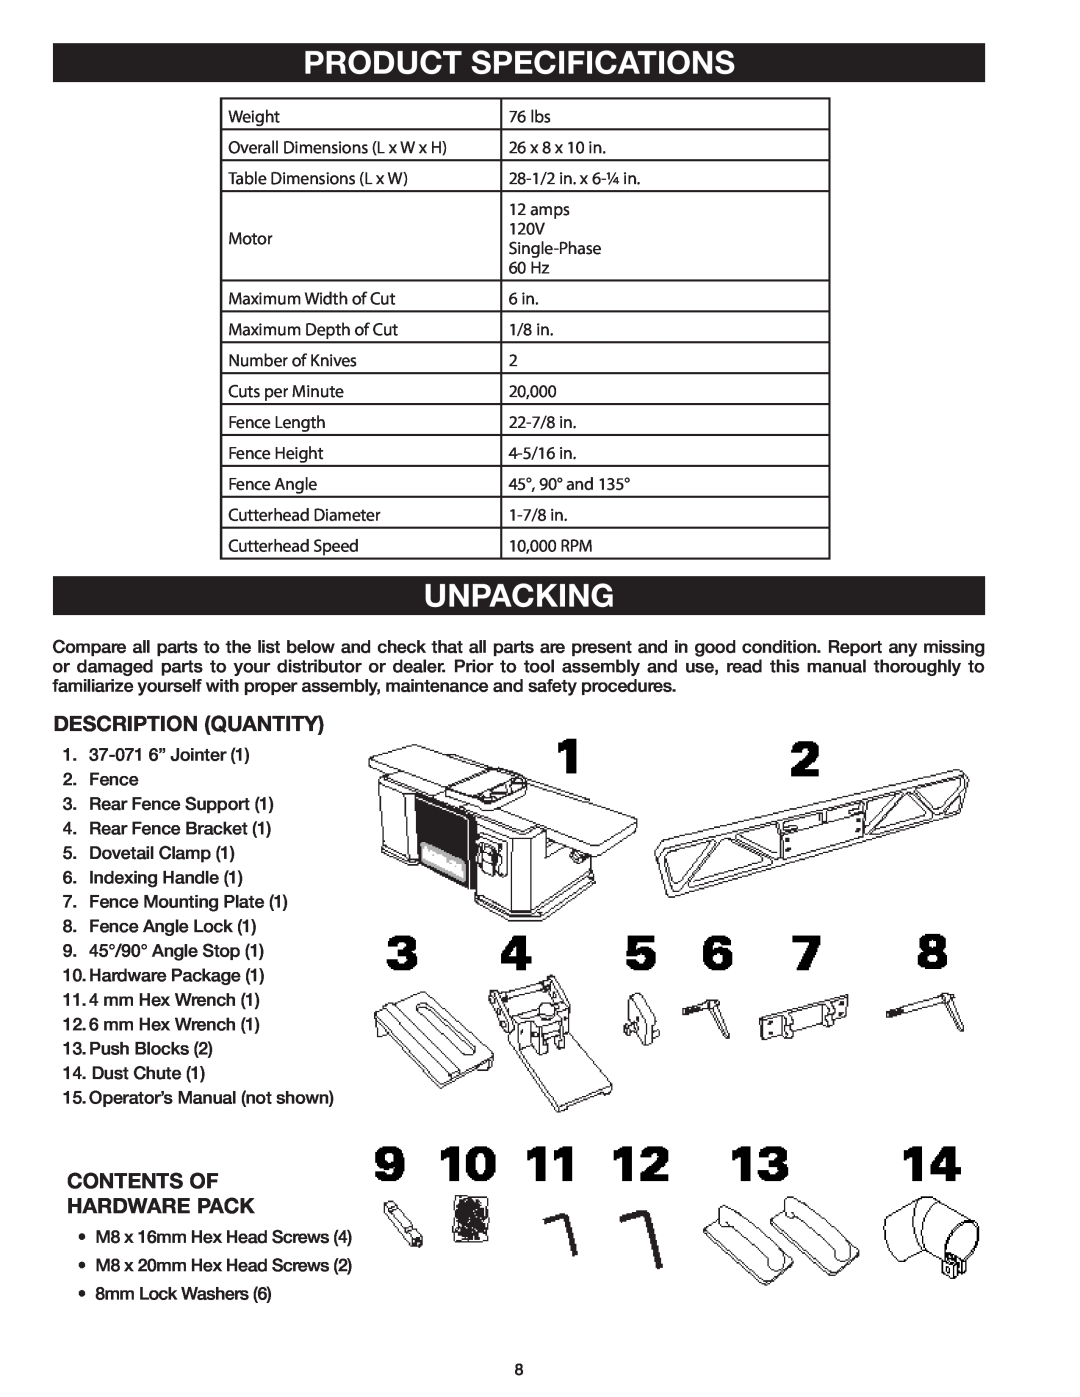 Delta 37-071 instruction manual Product Specifications, Unpacking, Description Quantity, Contents Of Hardware Pack 